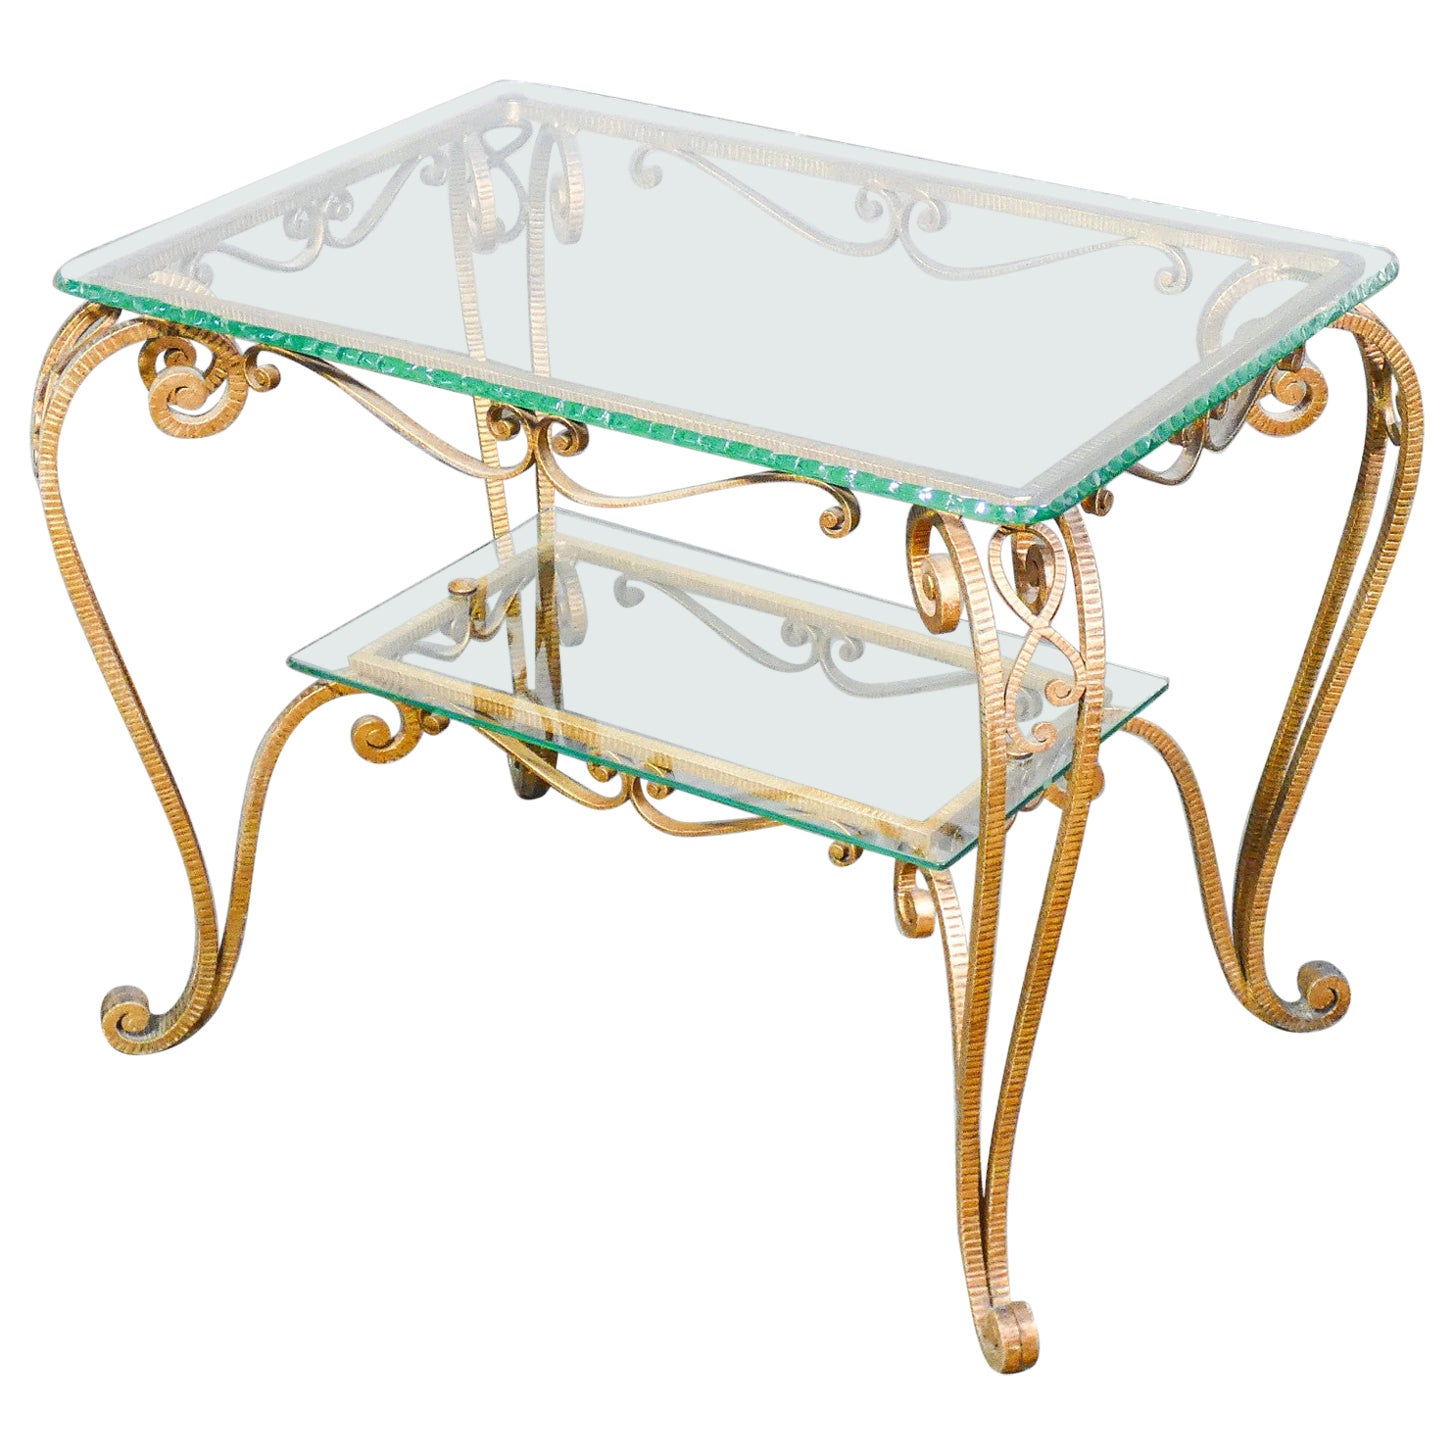 Pier Luigi COLLI design low coffee table made of gilded metal and glass. Italy, 1950s